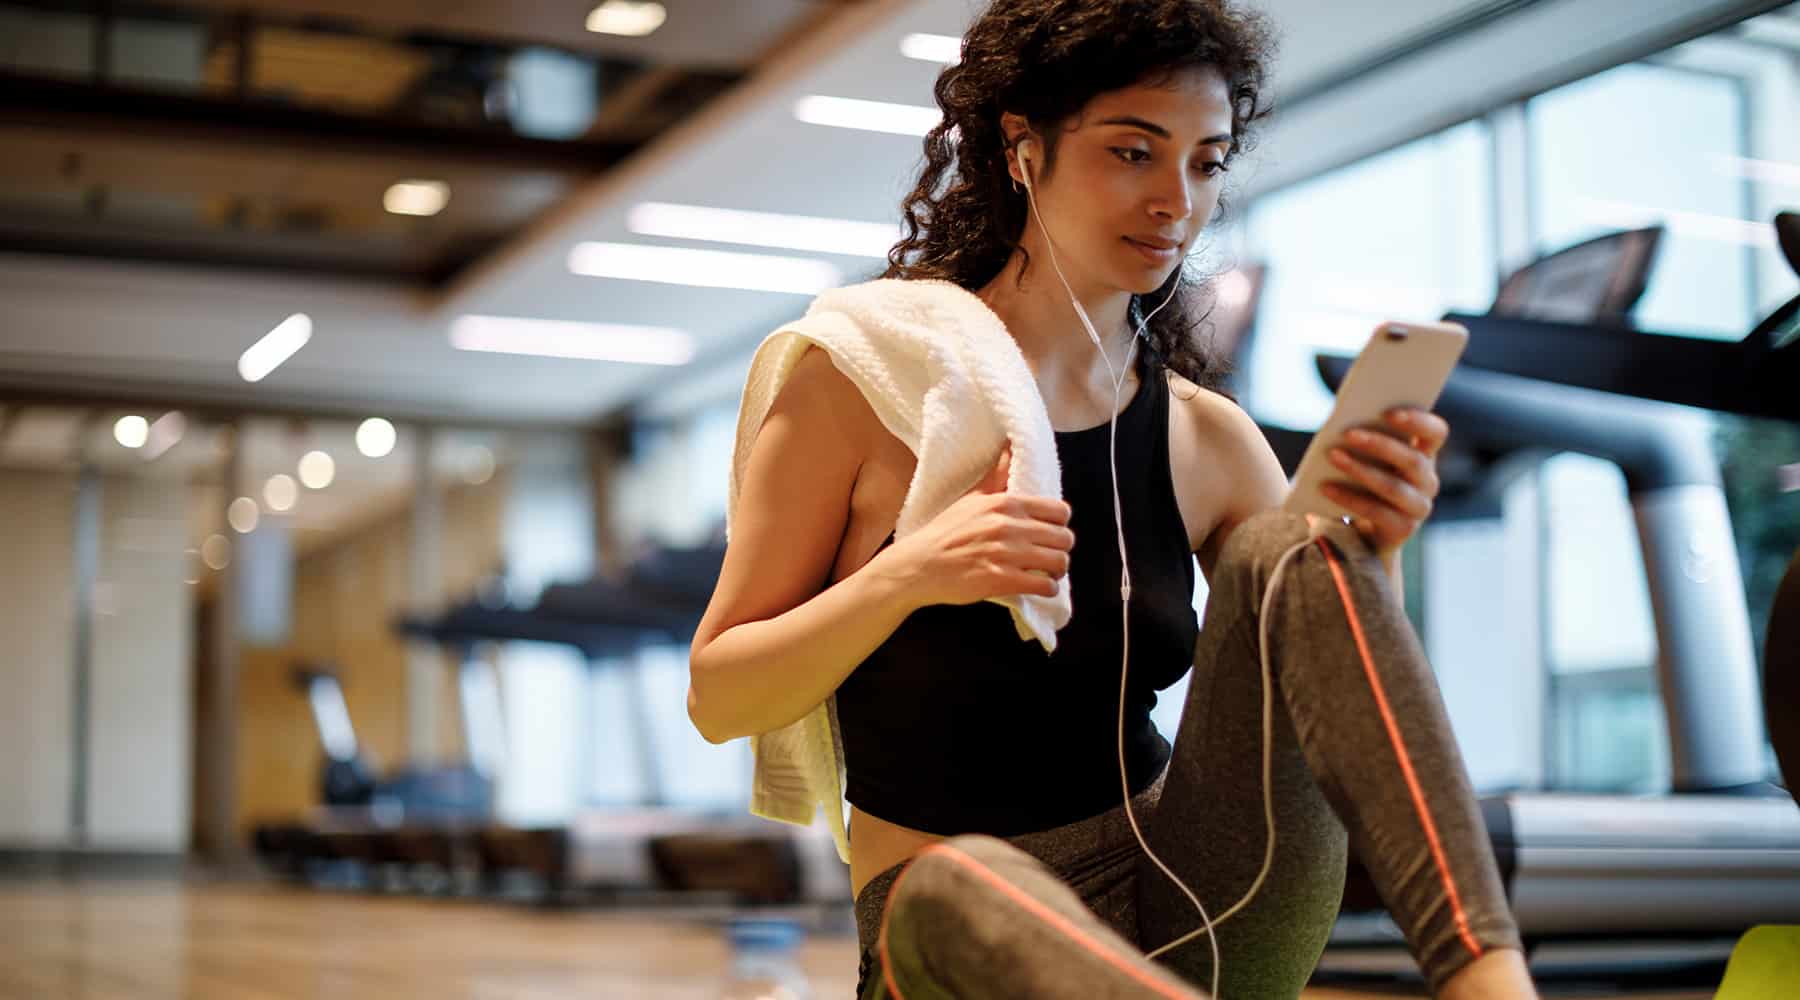 A woman takes a break and listens to music in modern fitness room in Concorde, CA